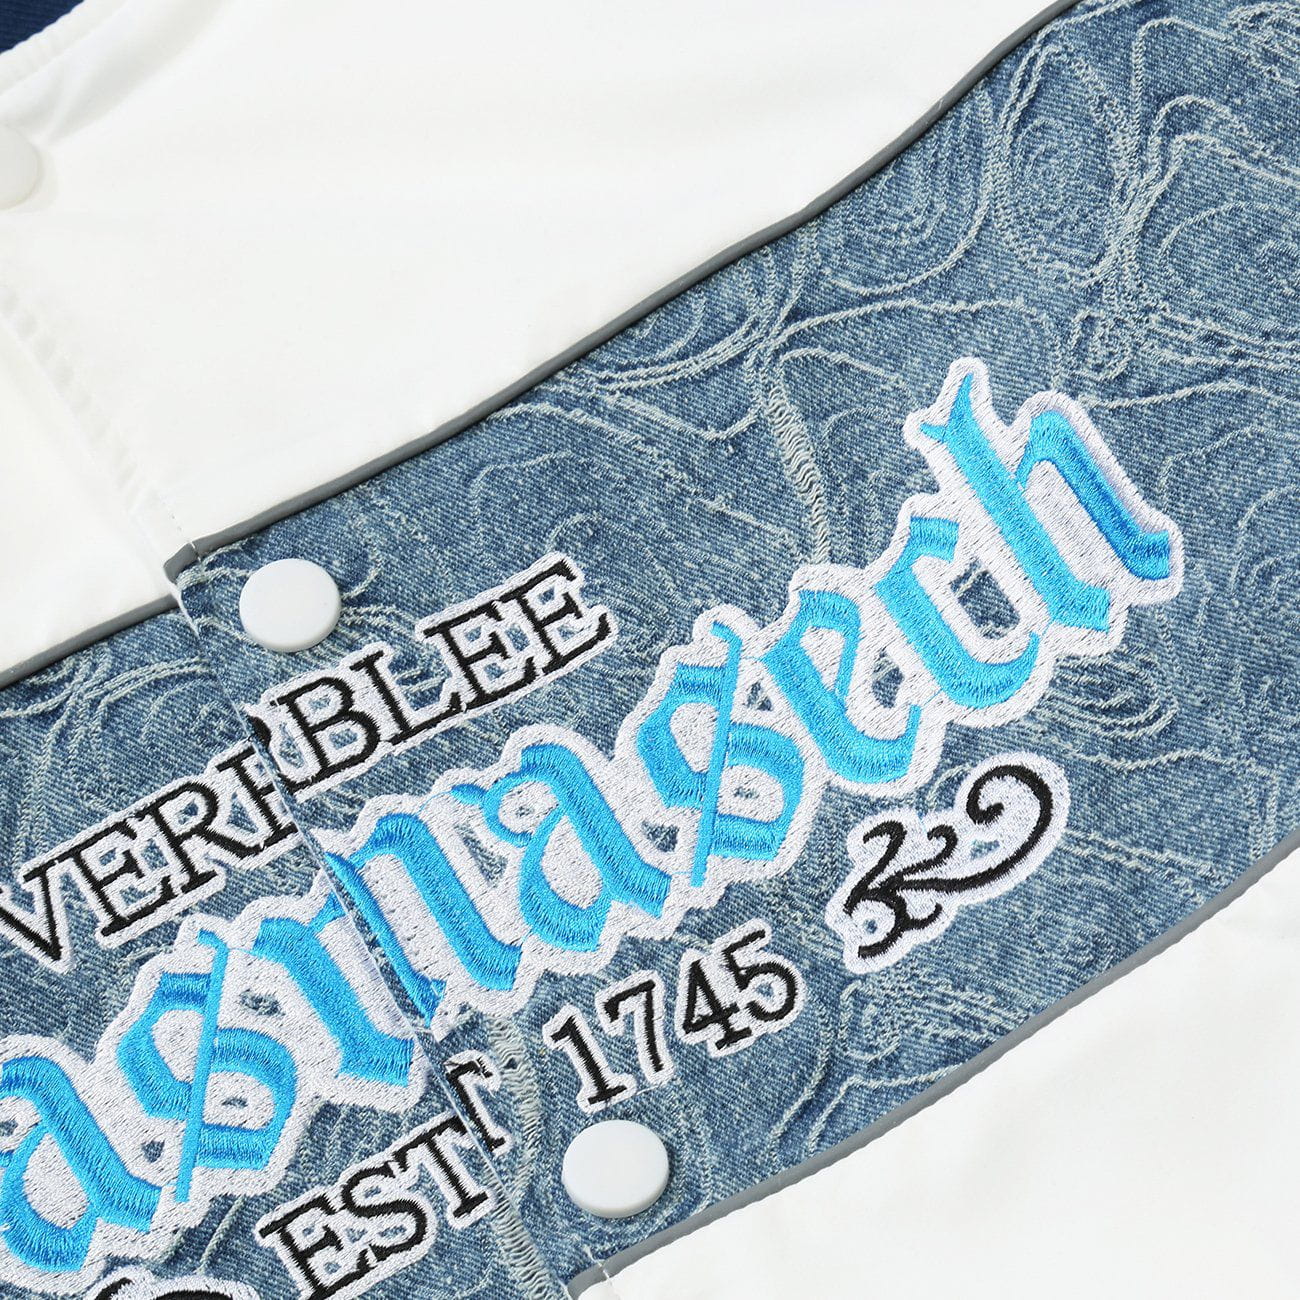 Majesda® - Embroidered Letter Patchwork Jacket outfit ideas, streetwear fashion - majesda.com